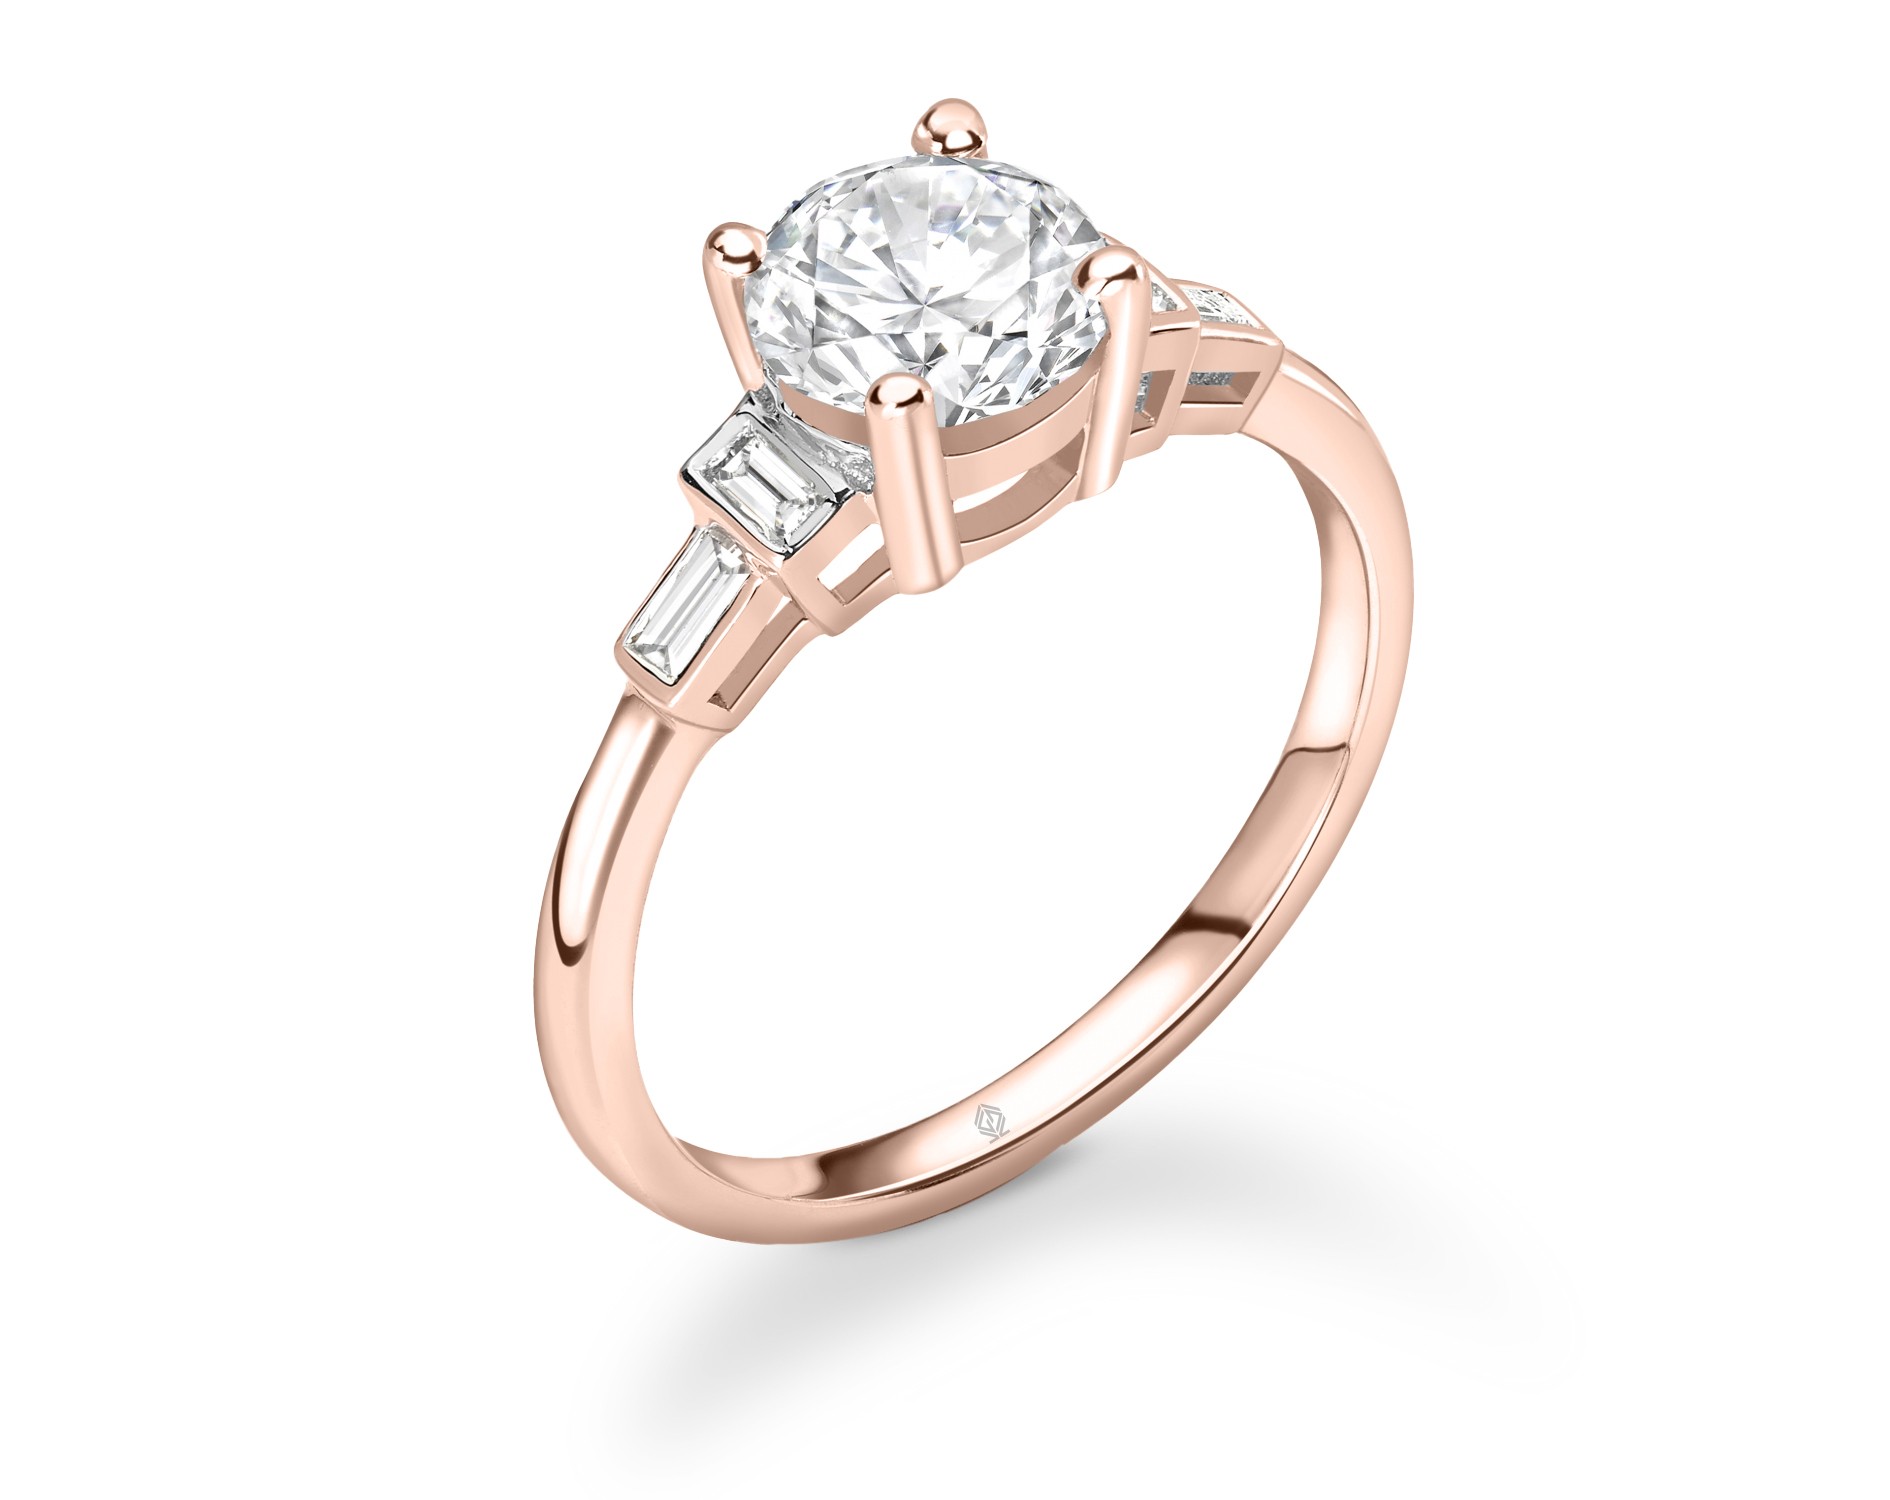 18K ROSE GOLD ROUND CUT 4 PRONGS DIAMOND ENGAGEMENT RING WITH BAGUETTES CUT SIDE STONES